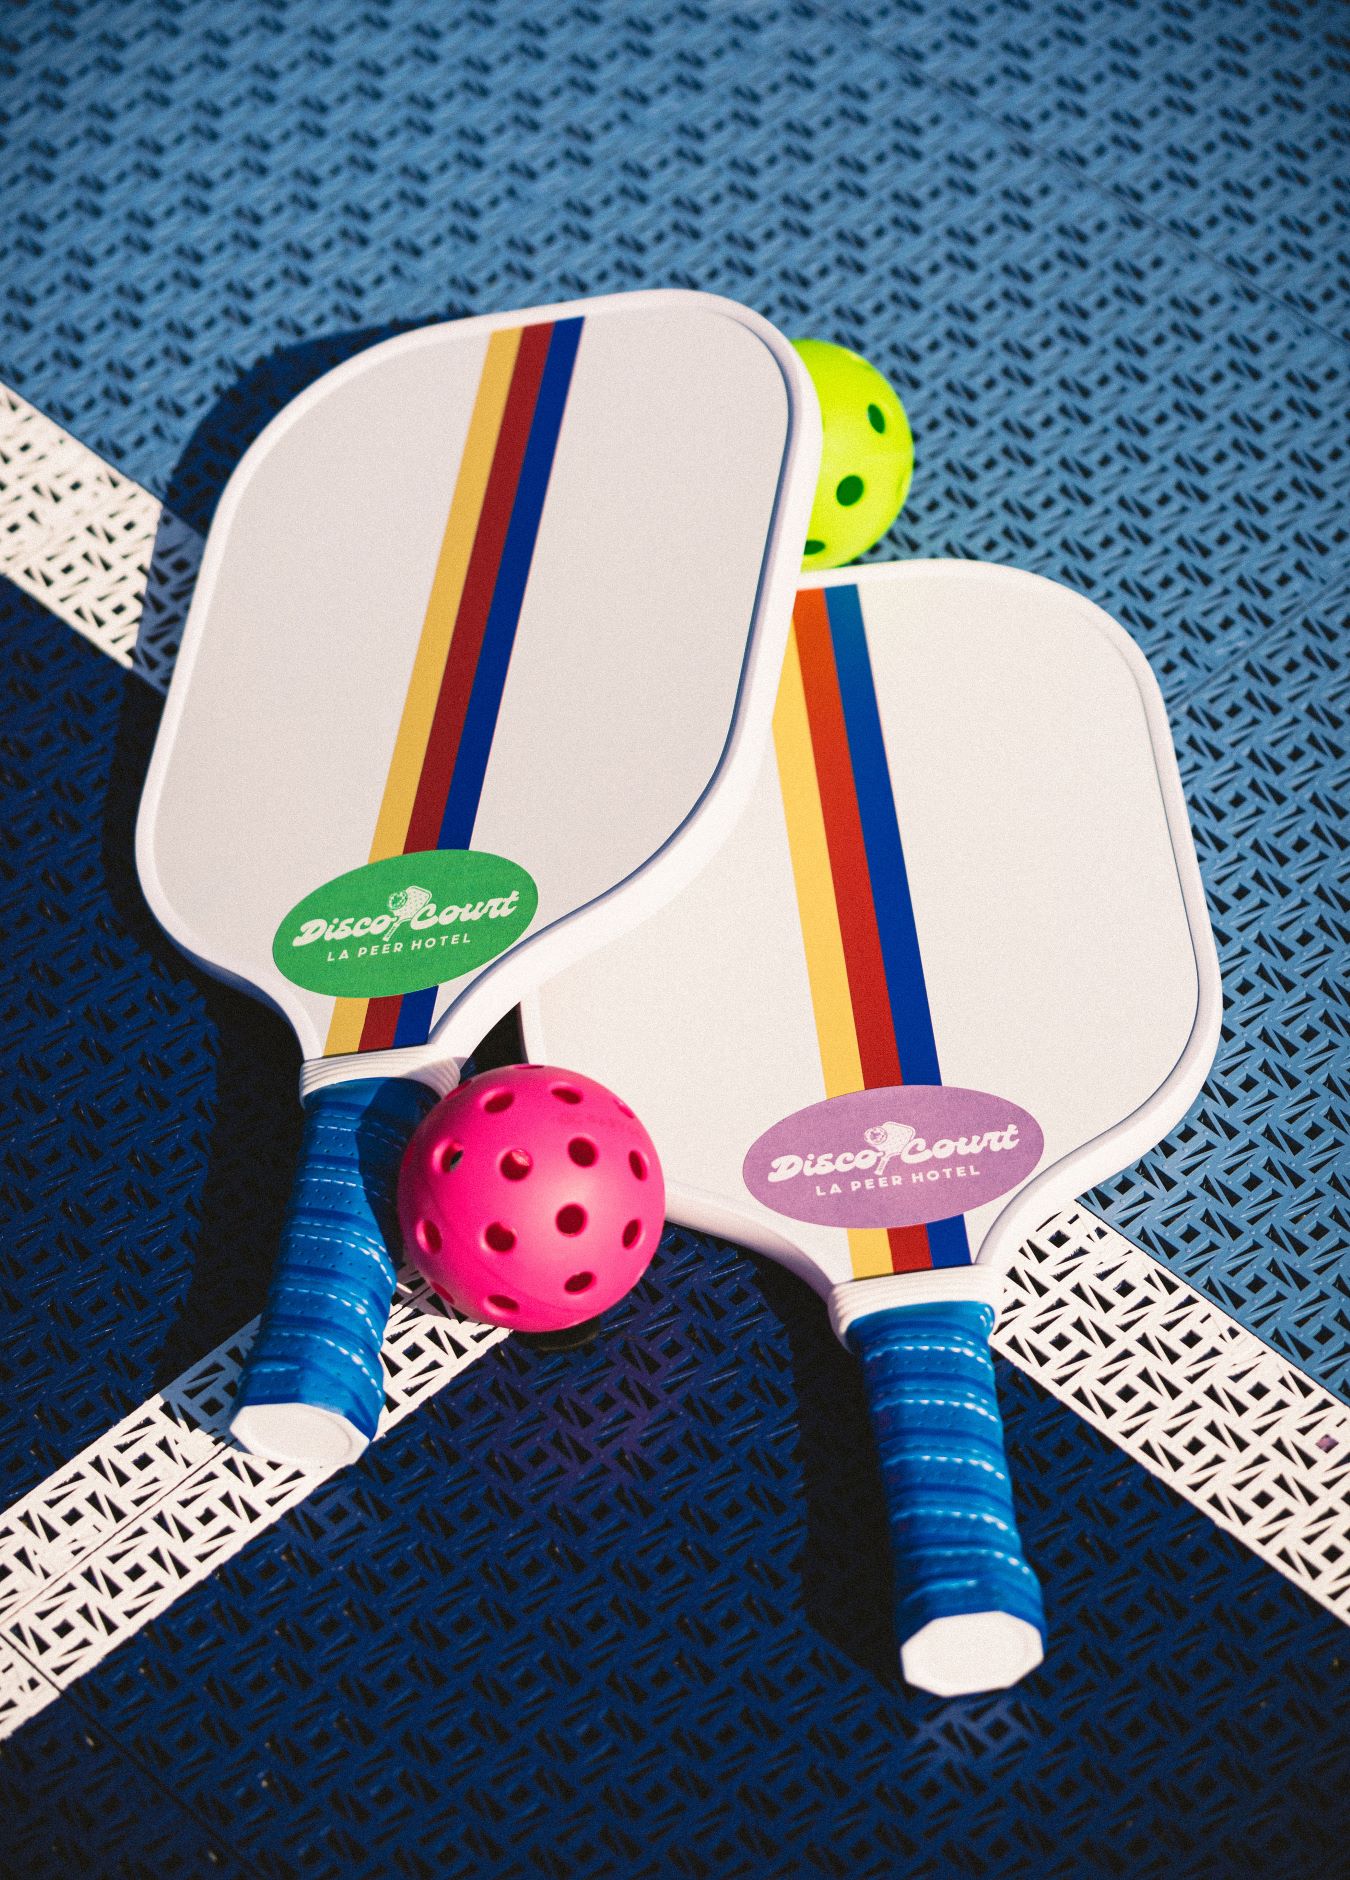 An image of 2 pickleball rackets.